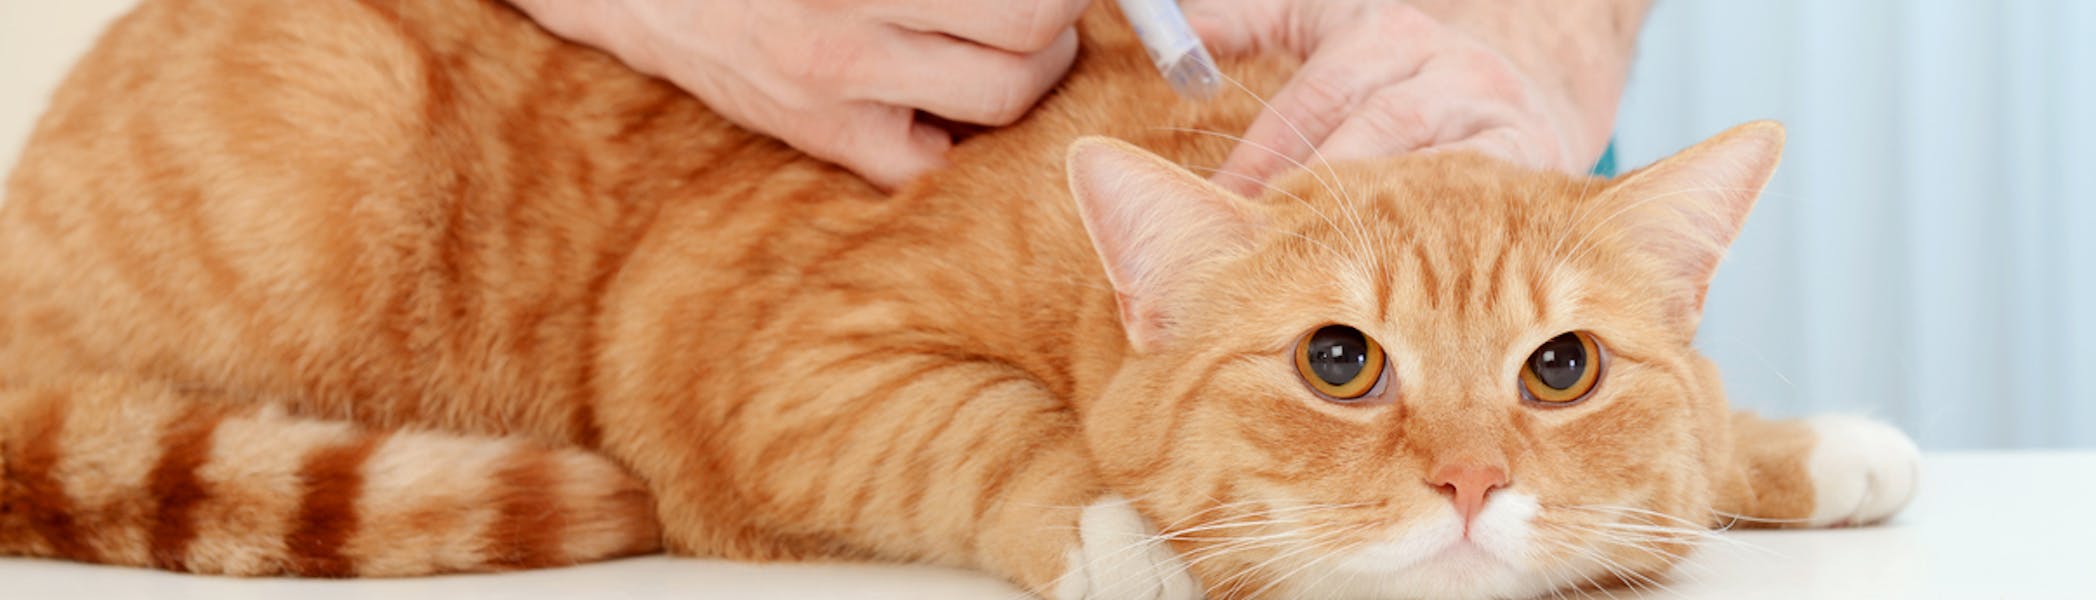 A cat being vaccinated